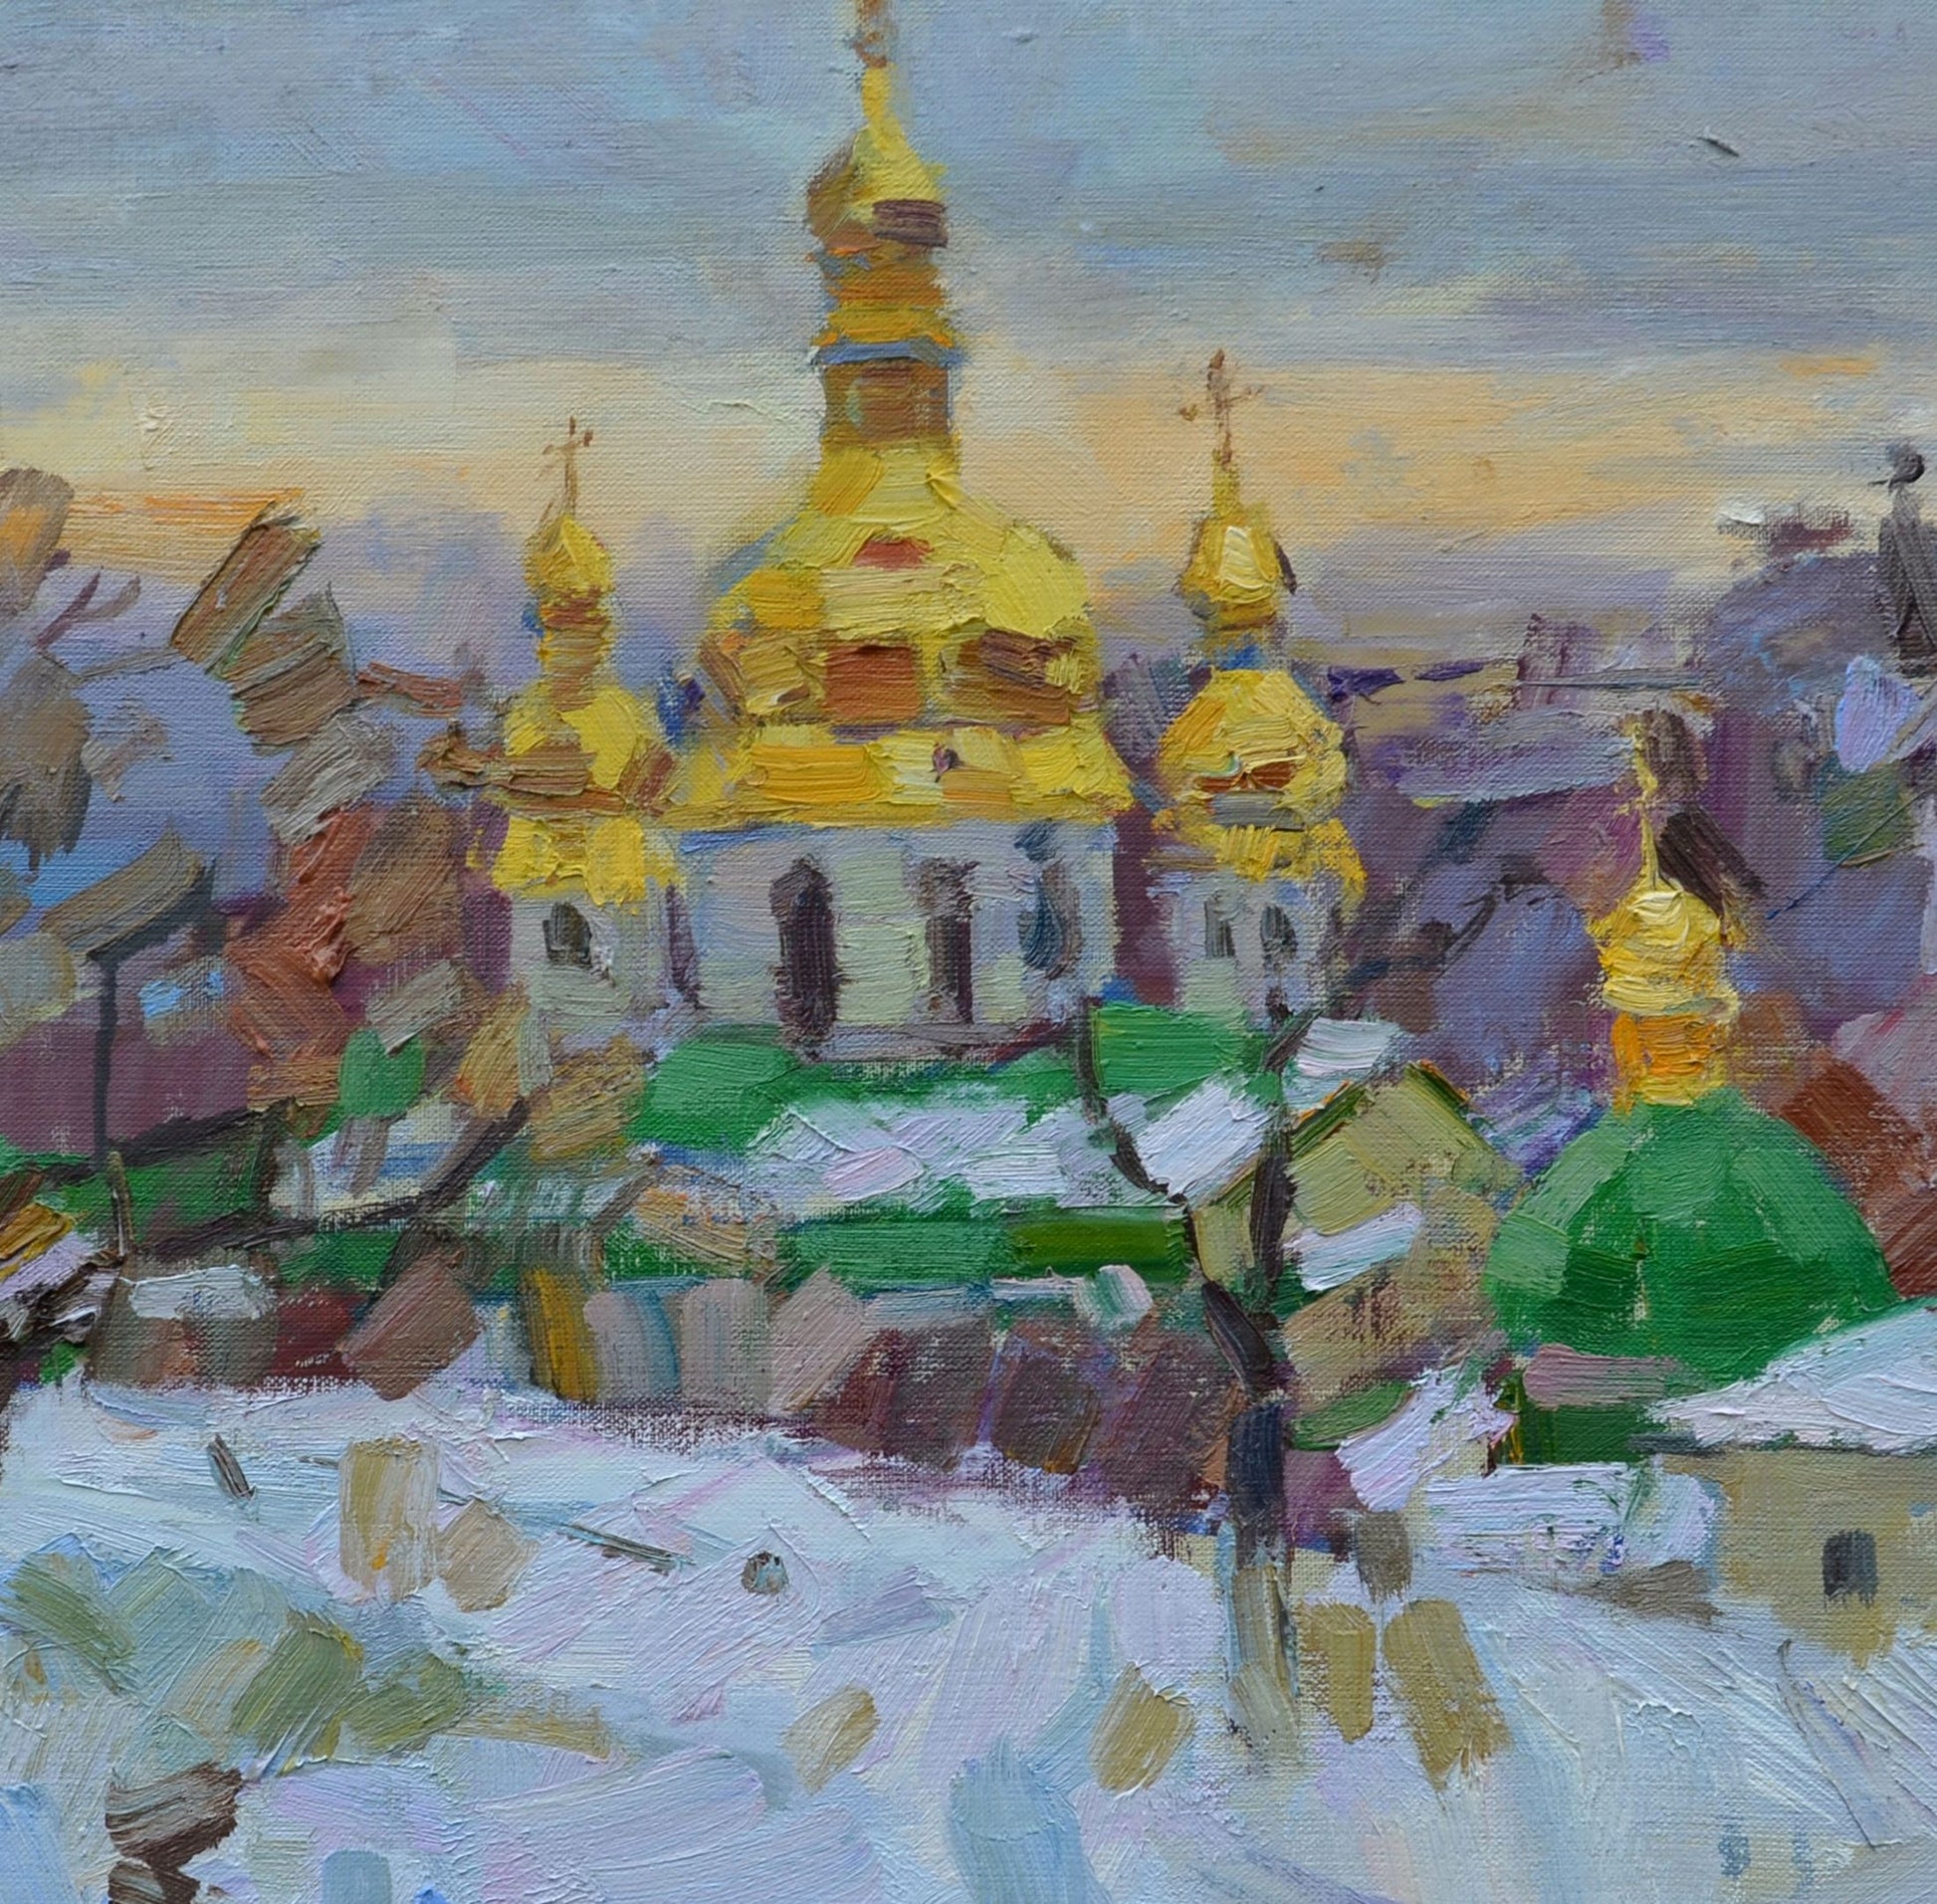 Vyacheslav Pereta's oil painting capturing "Winter in the Lavra"